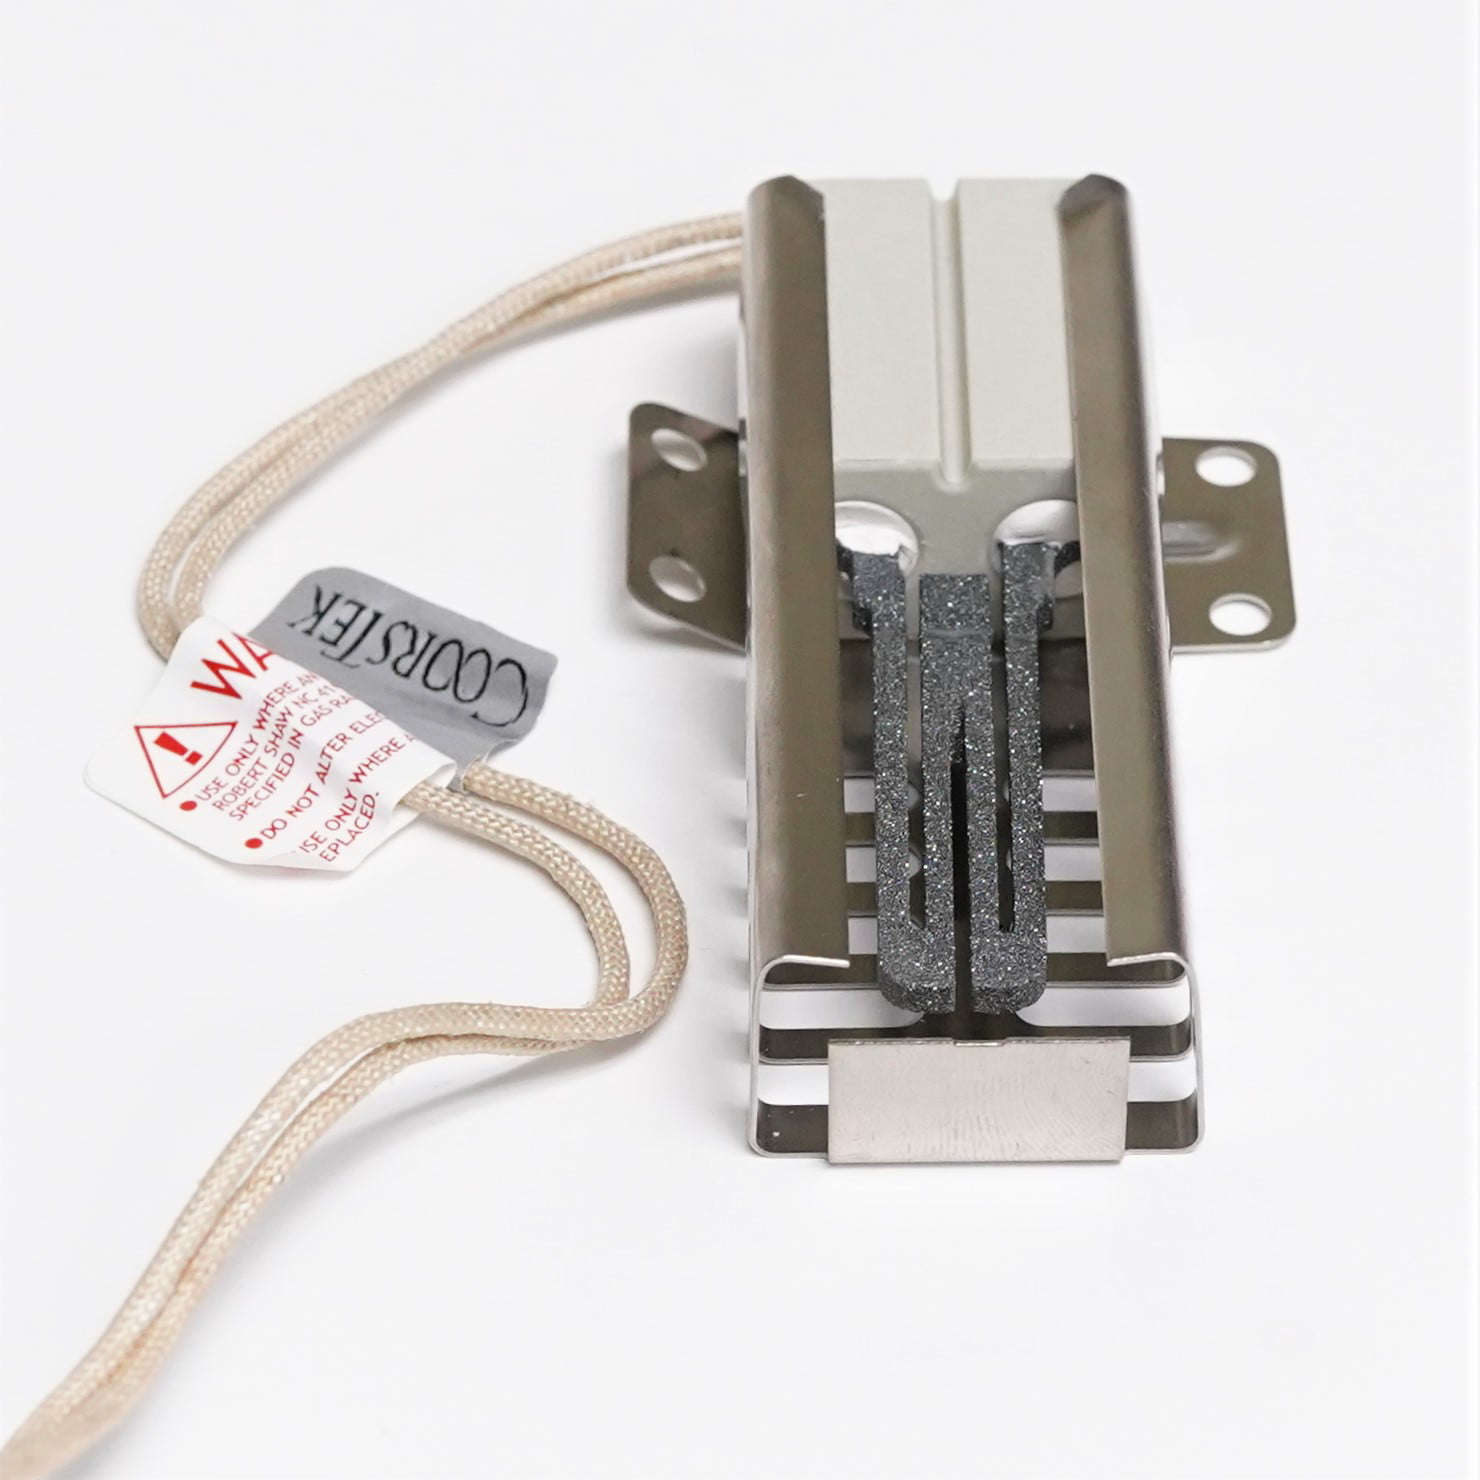 Gas Range Oven Ignitor for GE WB13T10045 223C3381G003 Igniter PS952863  AP3202322 - Walmart.com